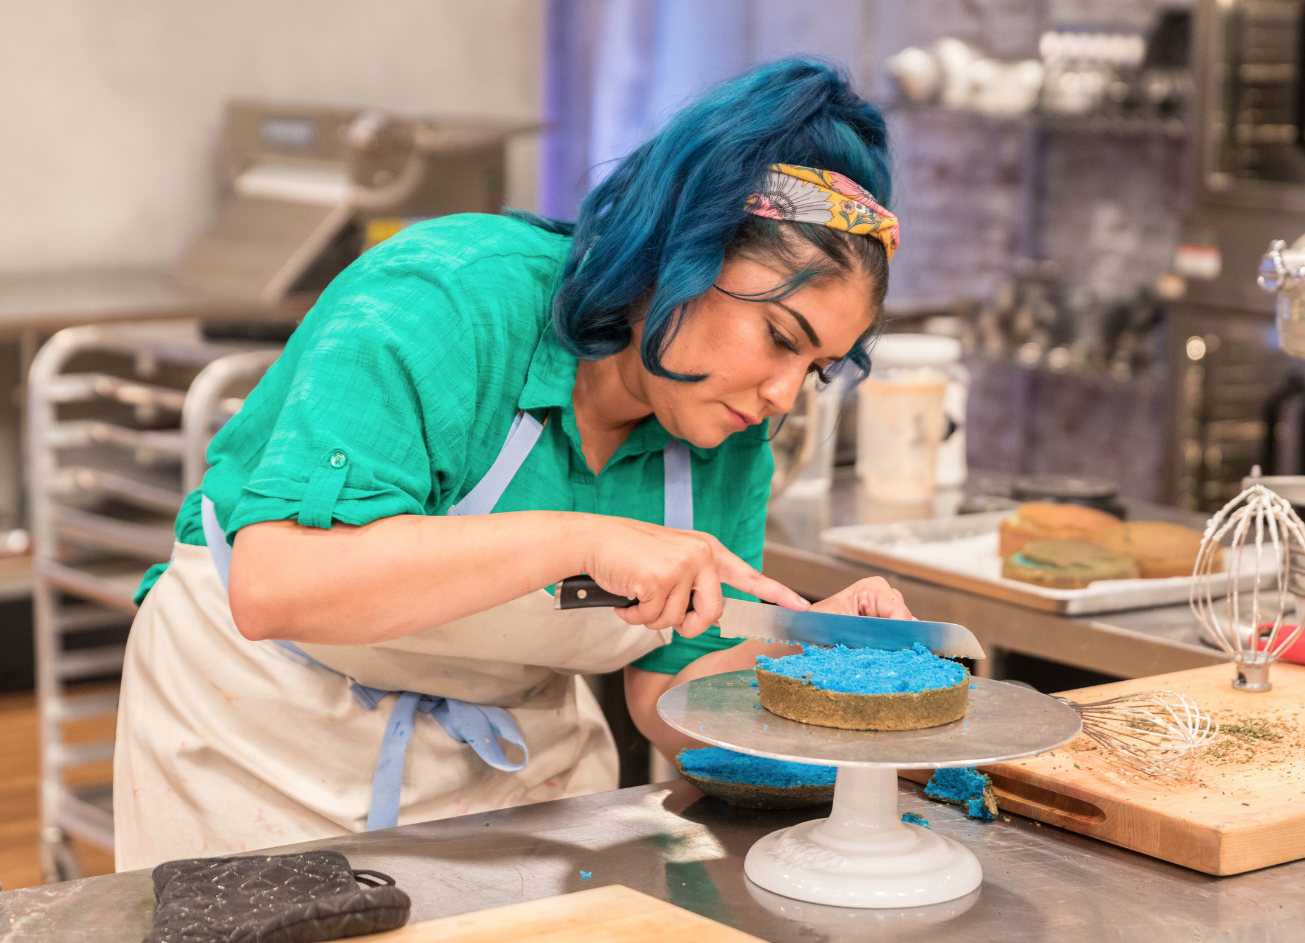 Why did Romy quit the Spring Baking Championship 2022?